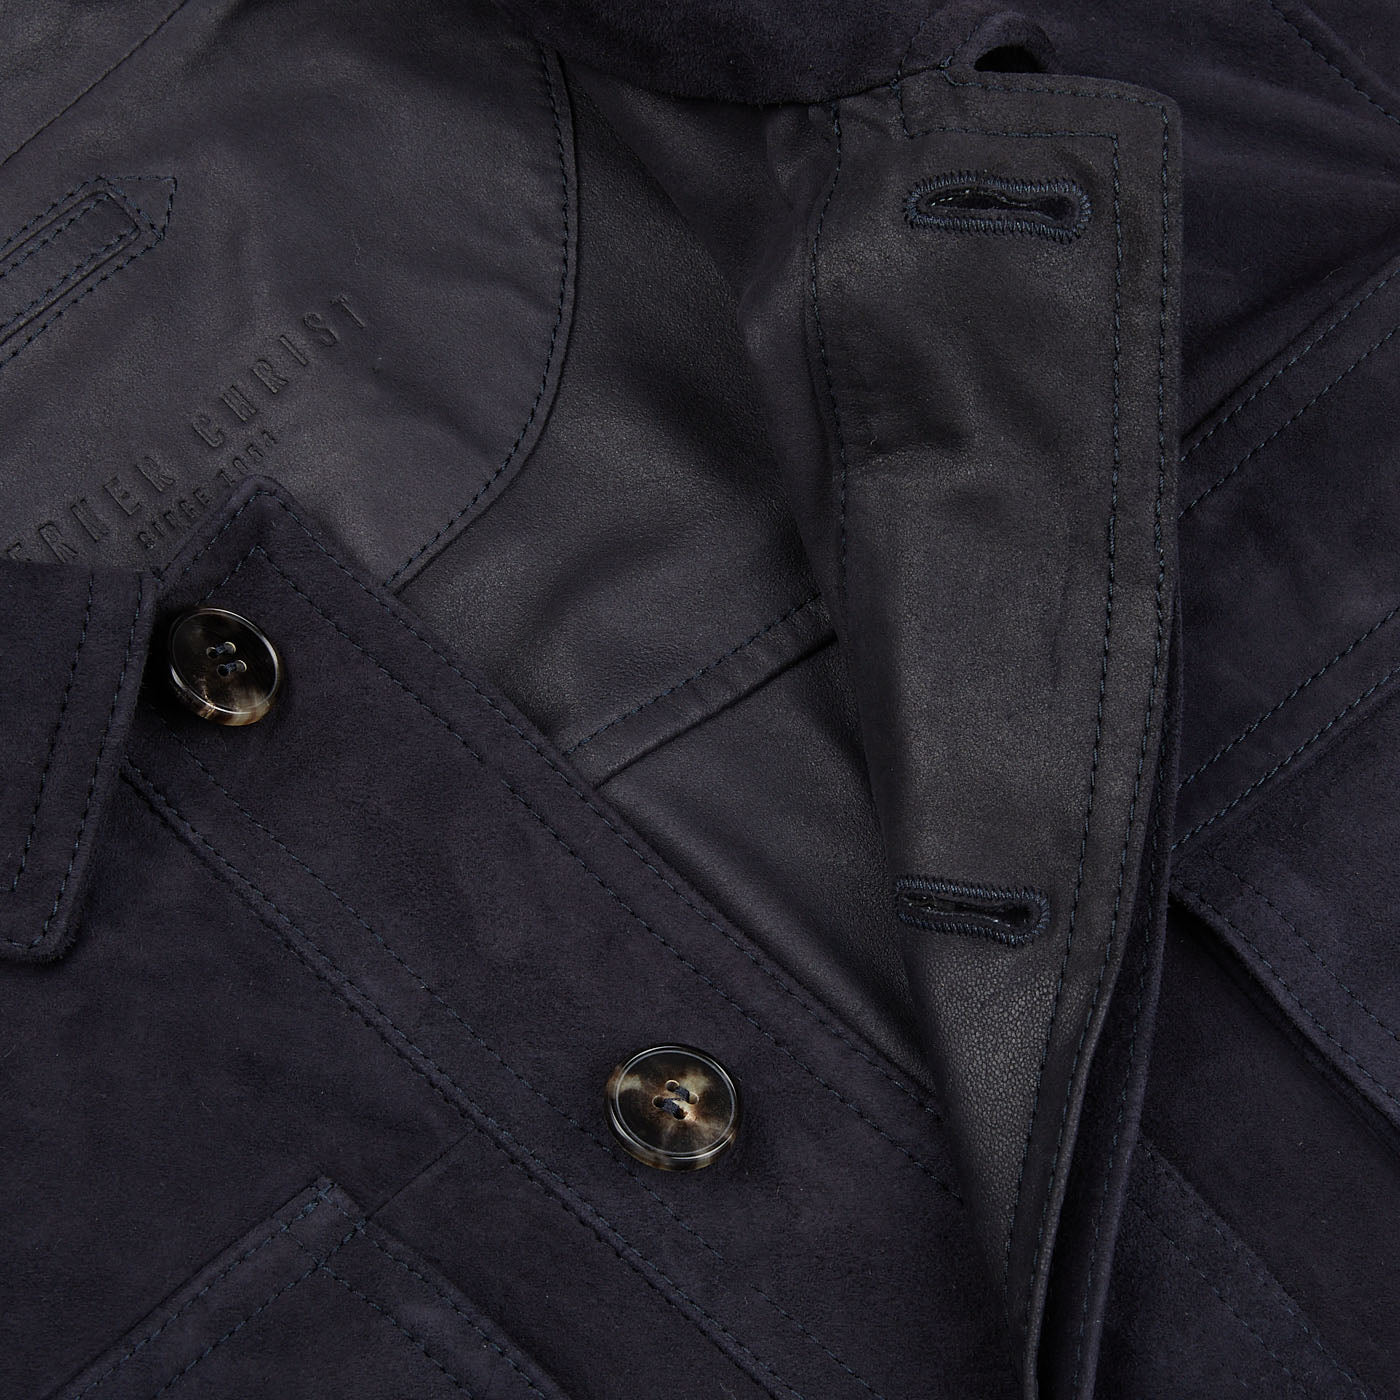 A close up image of a Werner Christ Navy Suede Anton Leather Jacket with buttons.